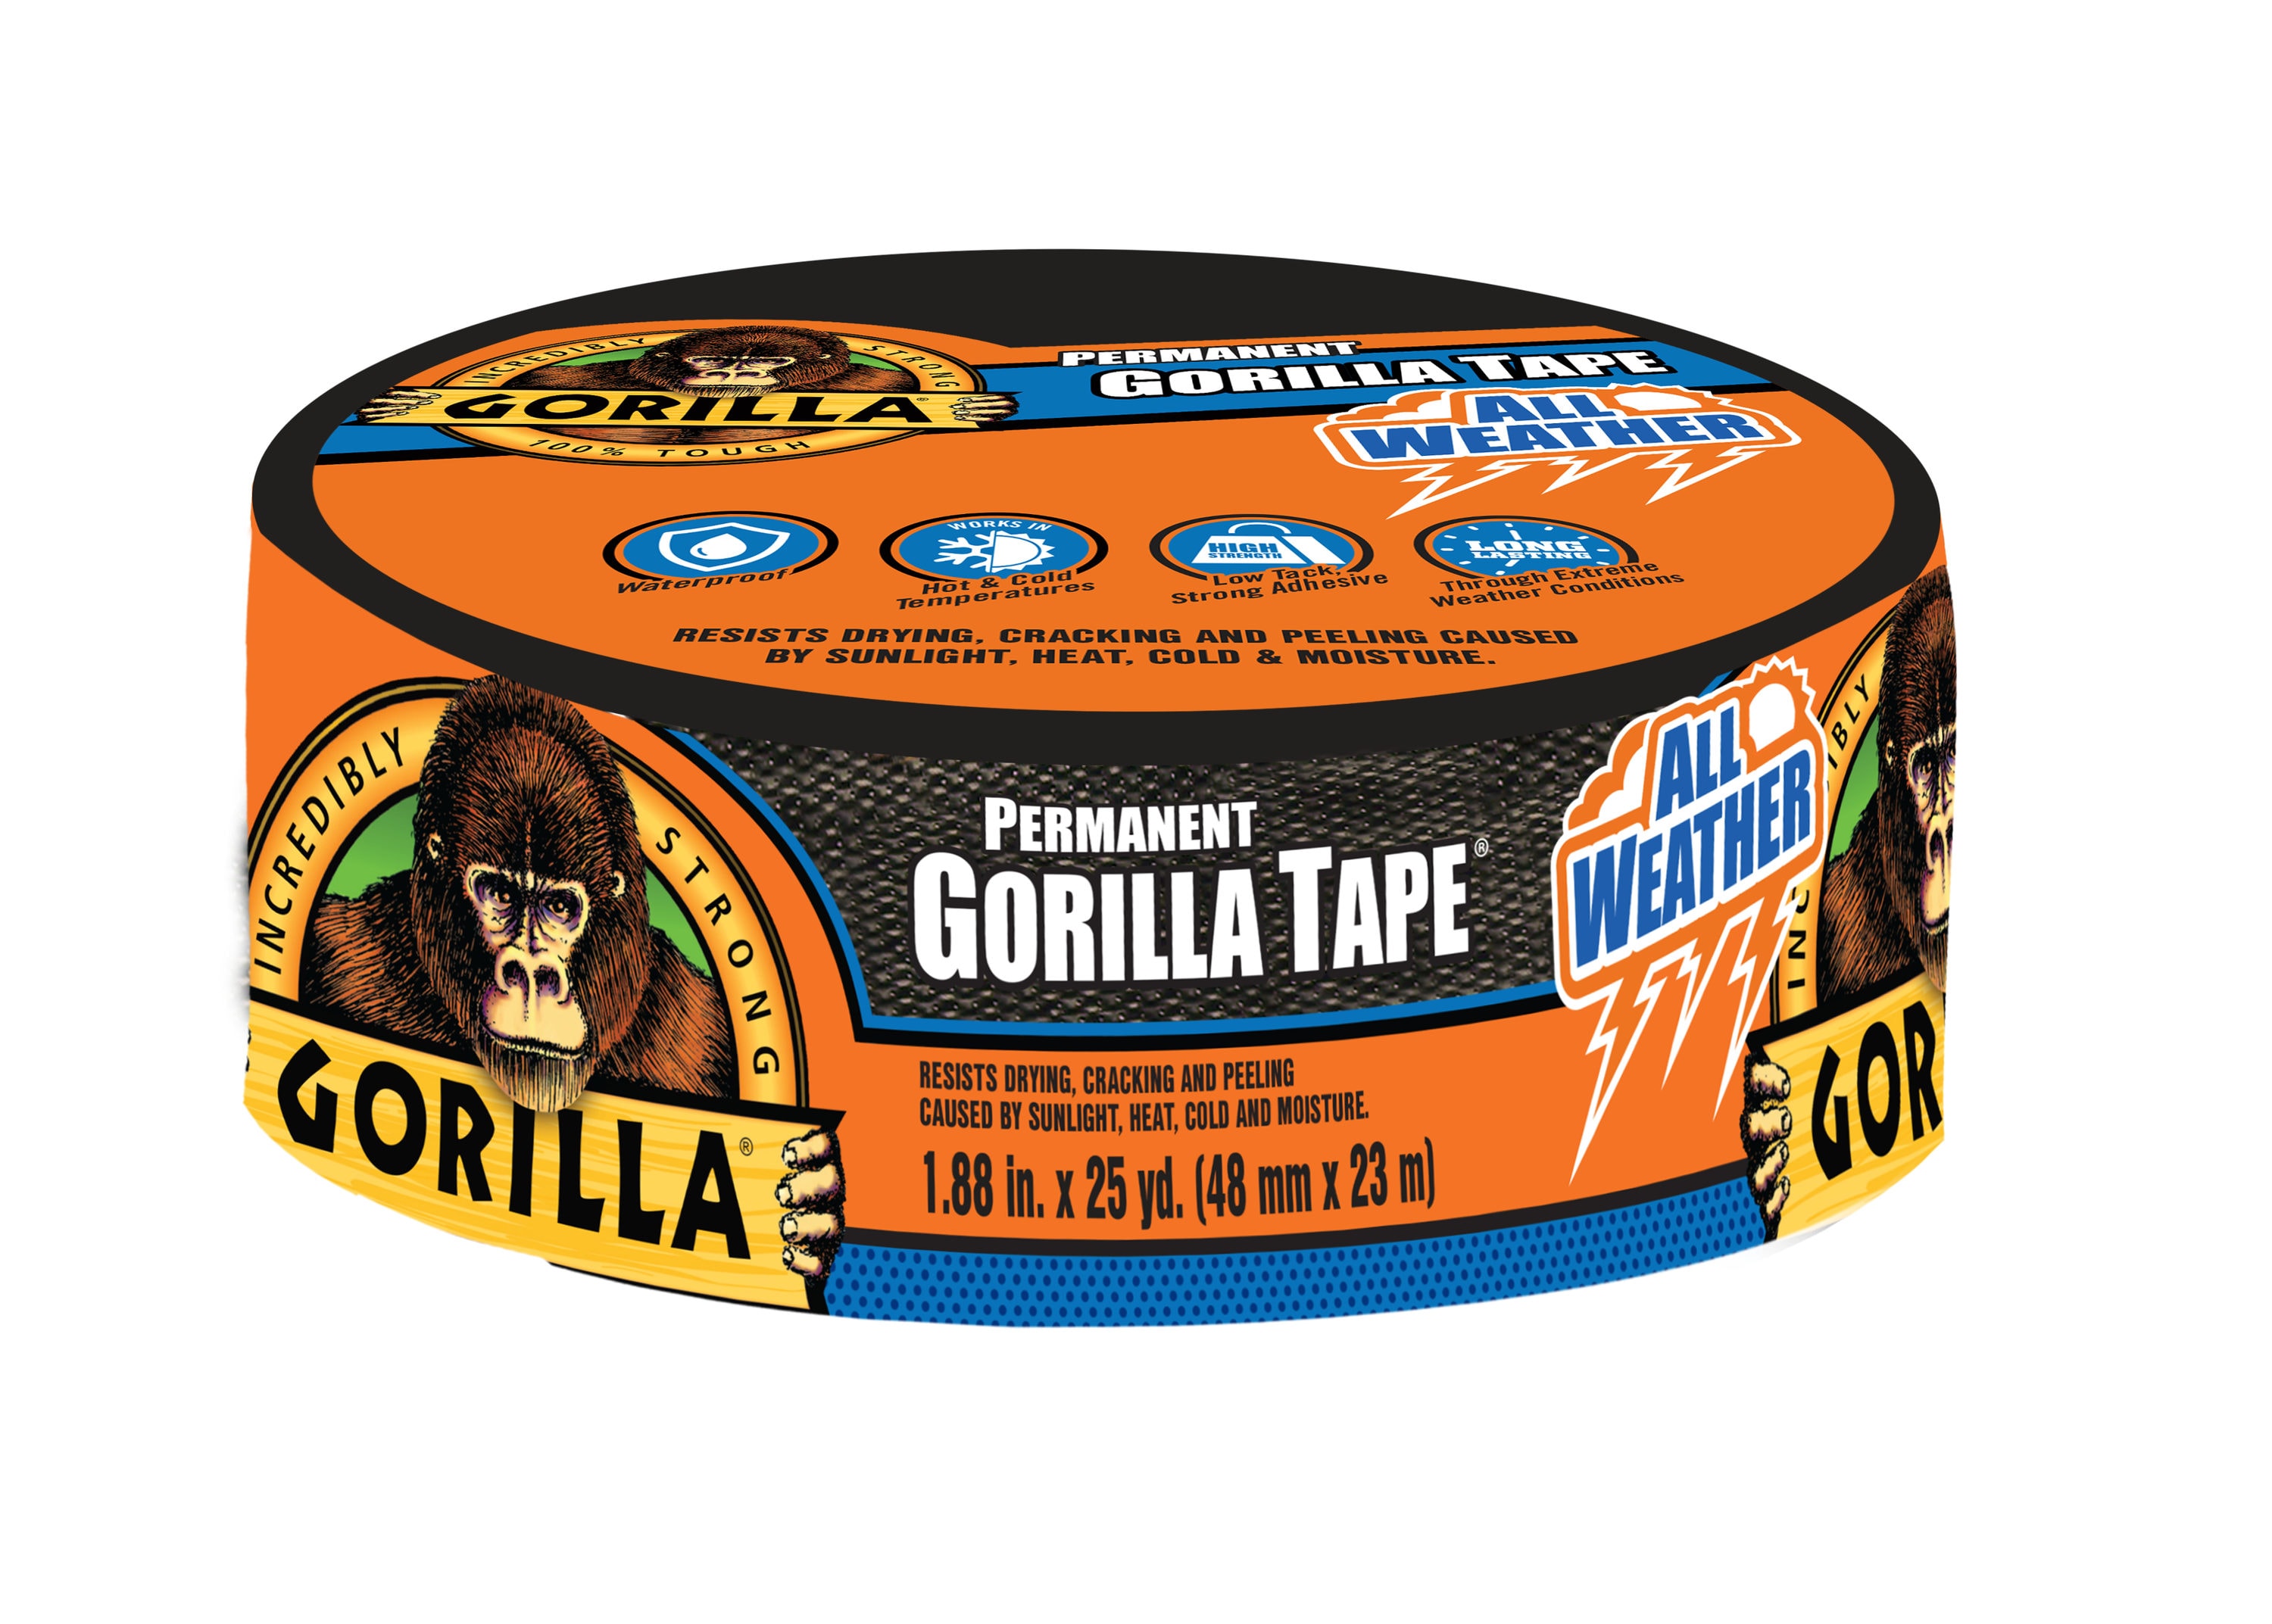 Black 1.88 x 25 yd Gorilla All Weather Outdoor Waterproof Duct Tape 3 Pack UV and Temperature Resistant 